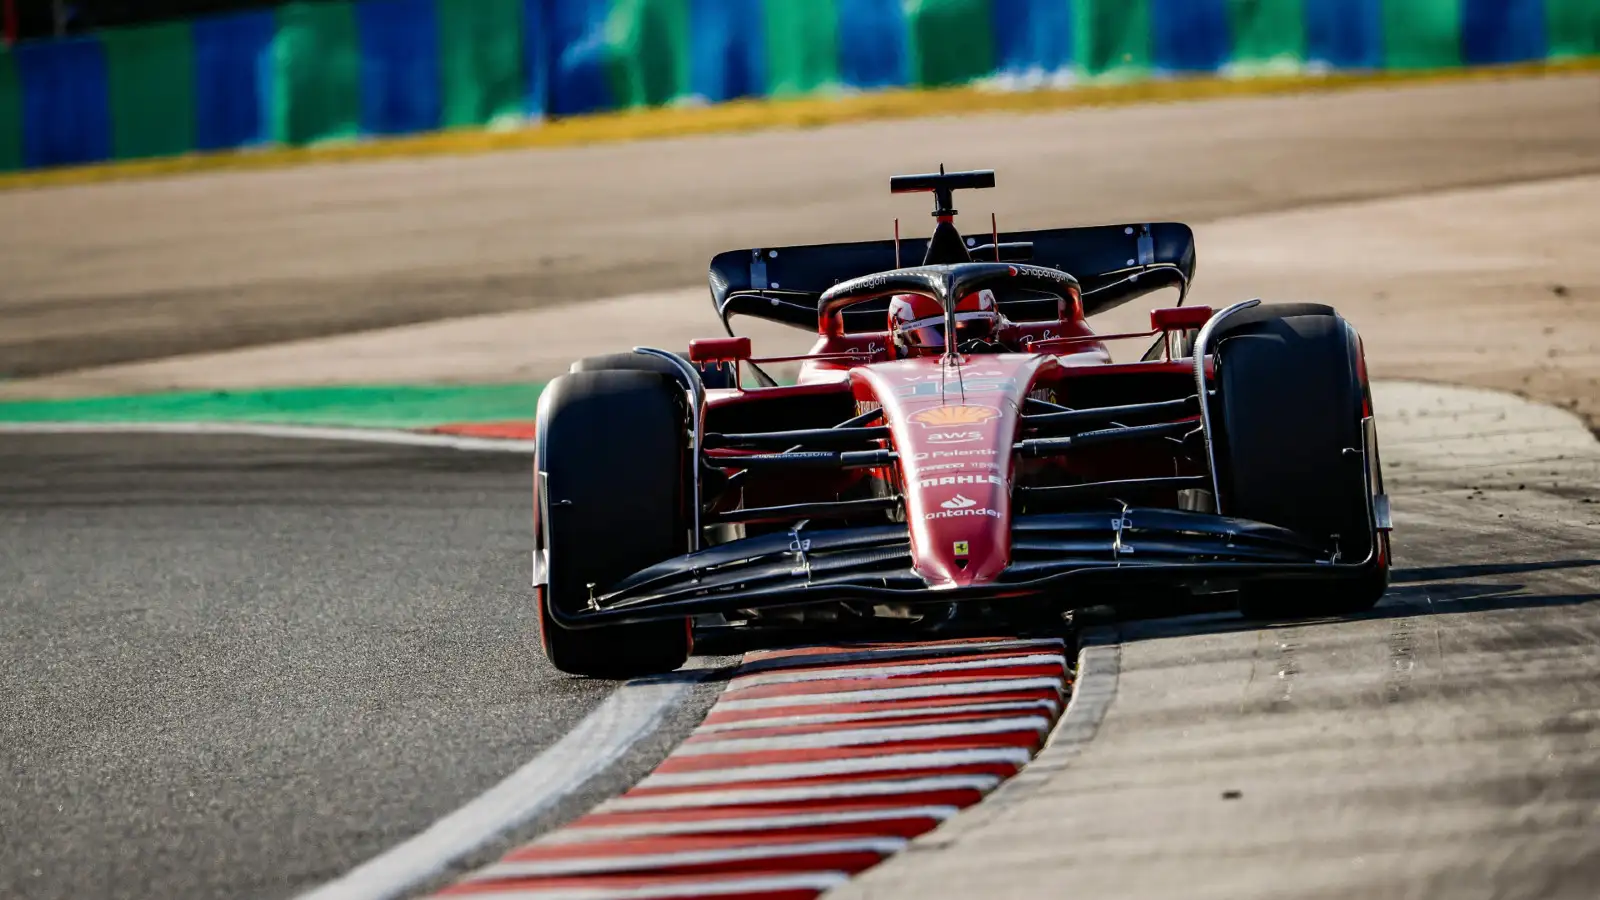 Ferrari's Charles Leclerc on track at the Hungarian Grand Prix. Budapest, July 2022.